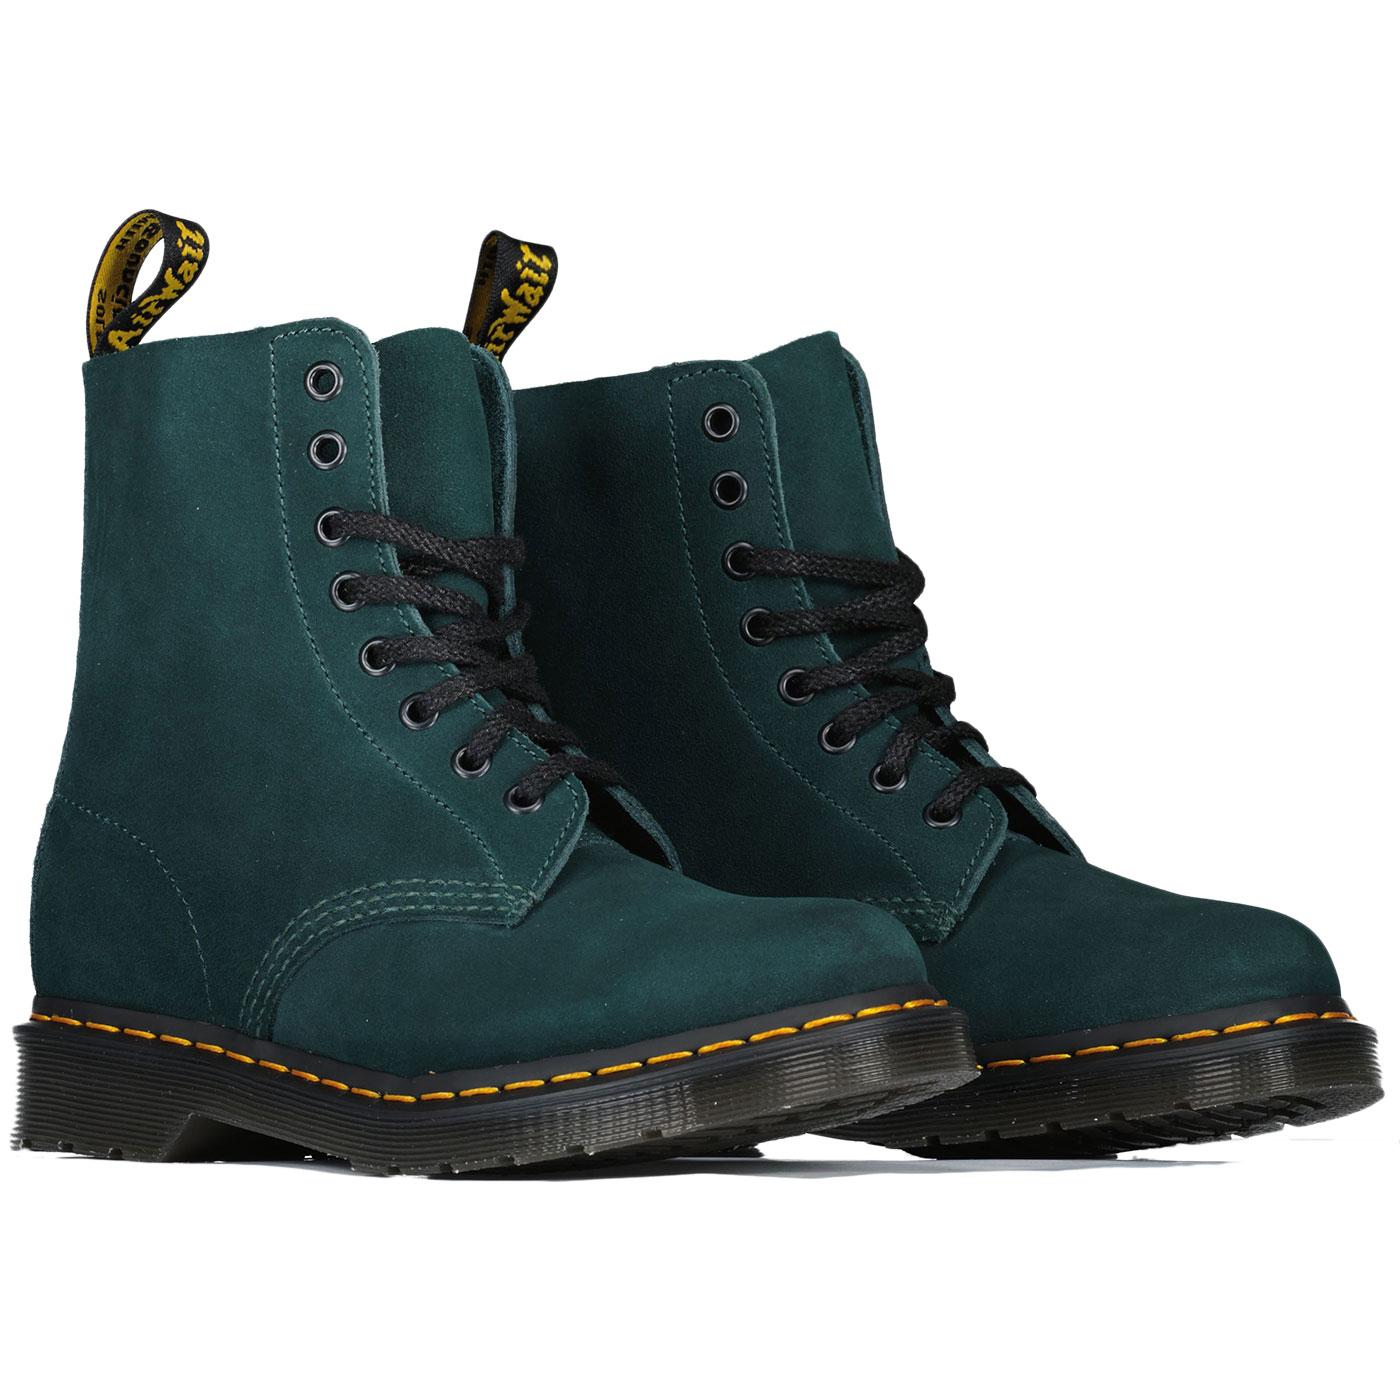 DR MARTENS 1460 Pascal Suede Men's Boots in Racer Green